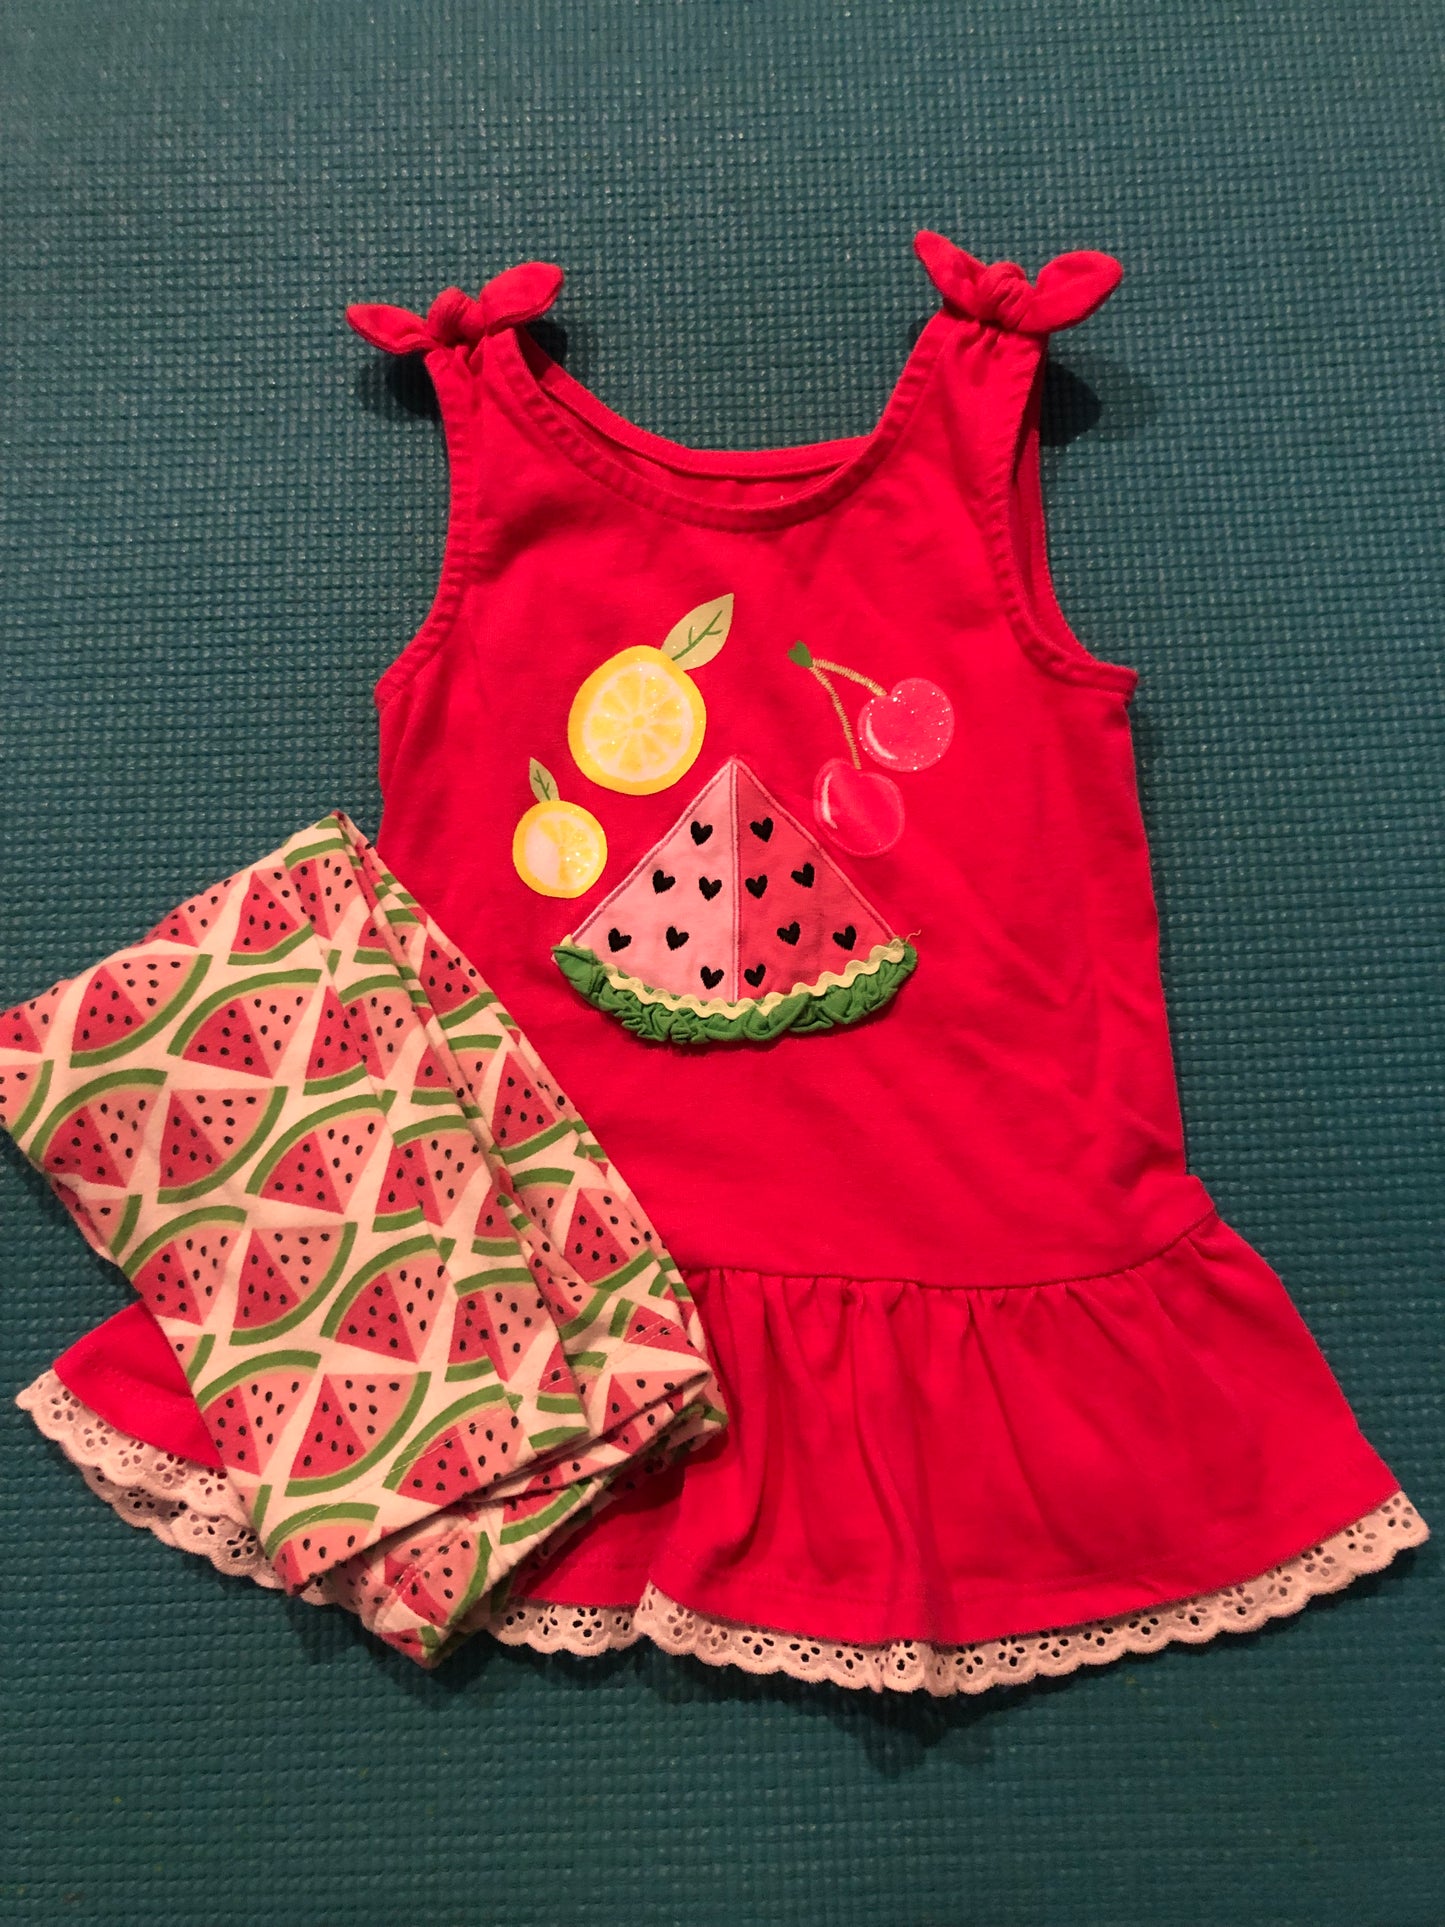 4T Girls Watermelon Outfit